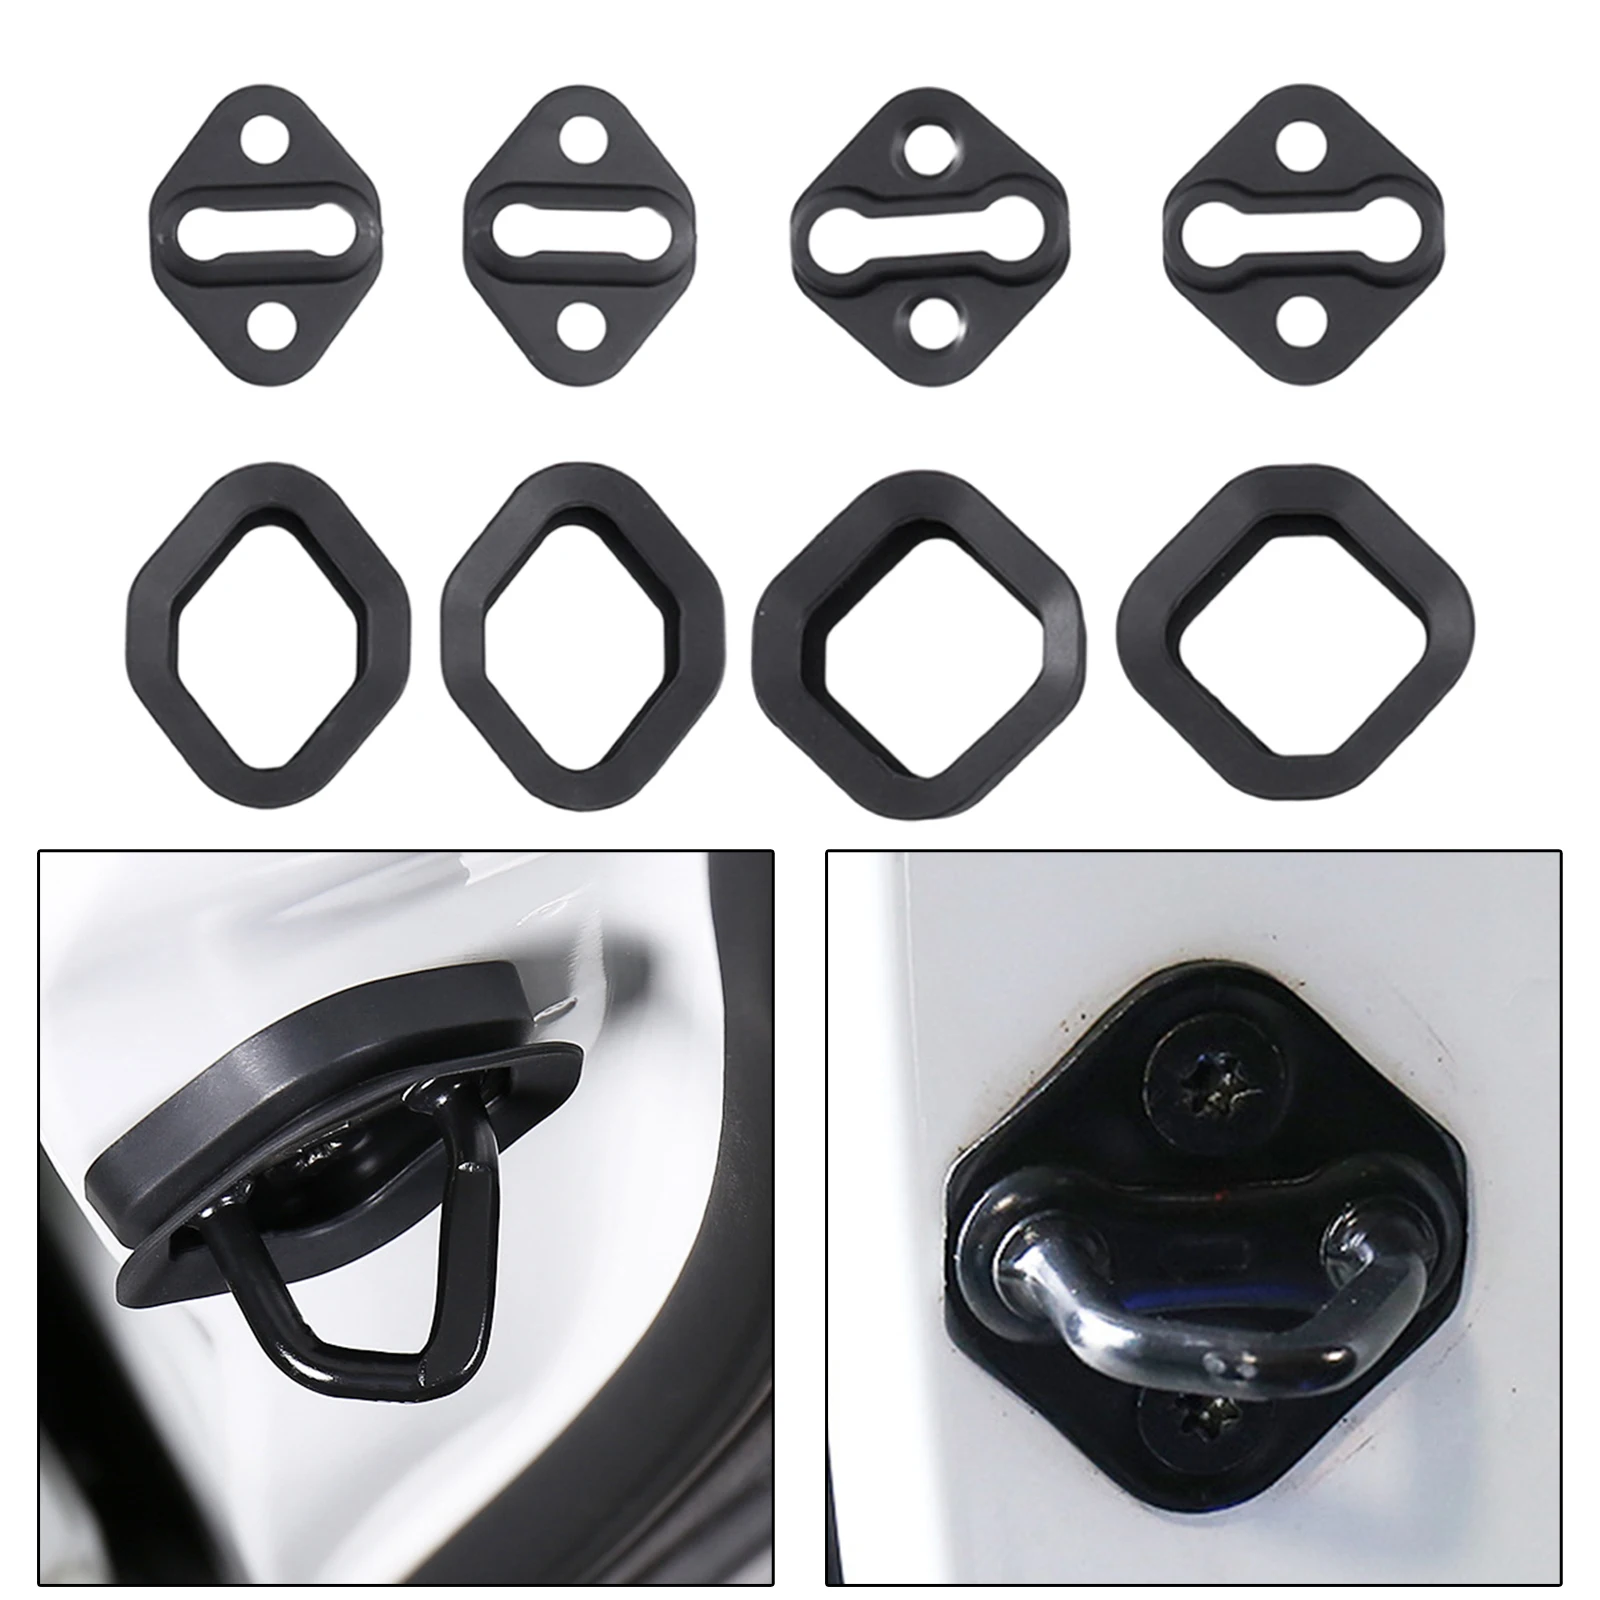 4-Pack Door Lock latches Striker Cover Protective for Honda Elysion